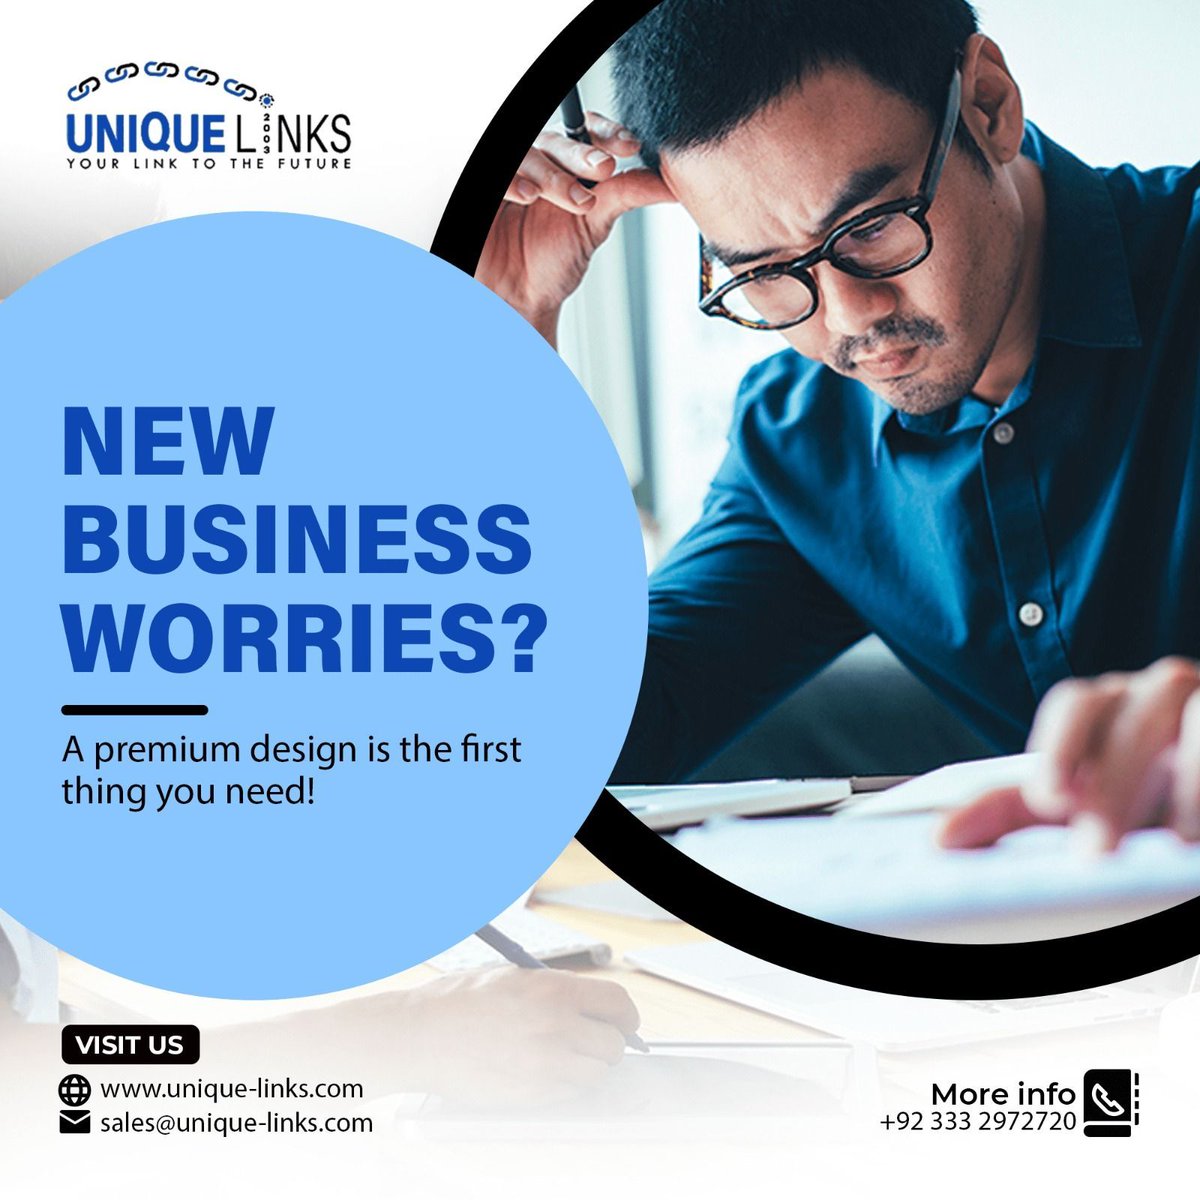 New business worries? A premium design is the first thing you need!
Contact Us At:
unique-links.com
.
#GraphicDesign #designsolutions #businessbranding #MondayMotivation